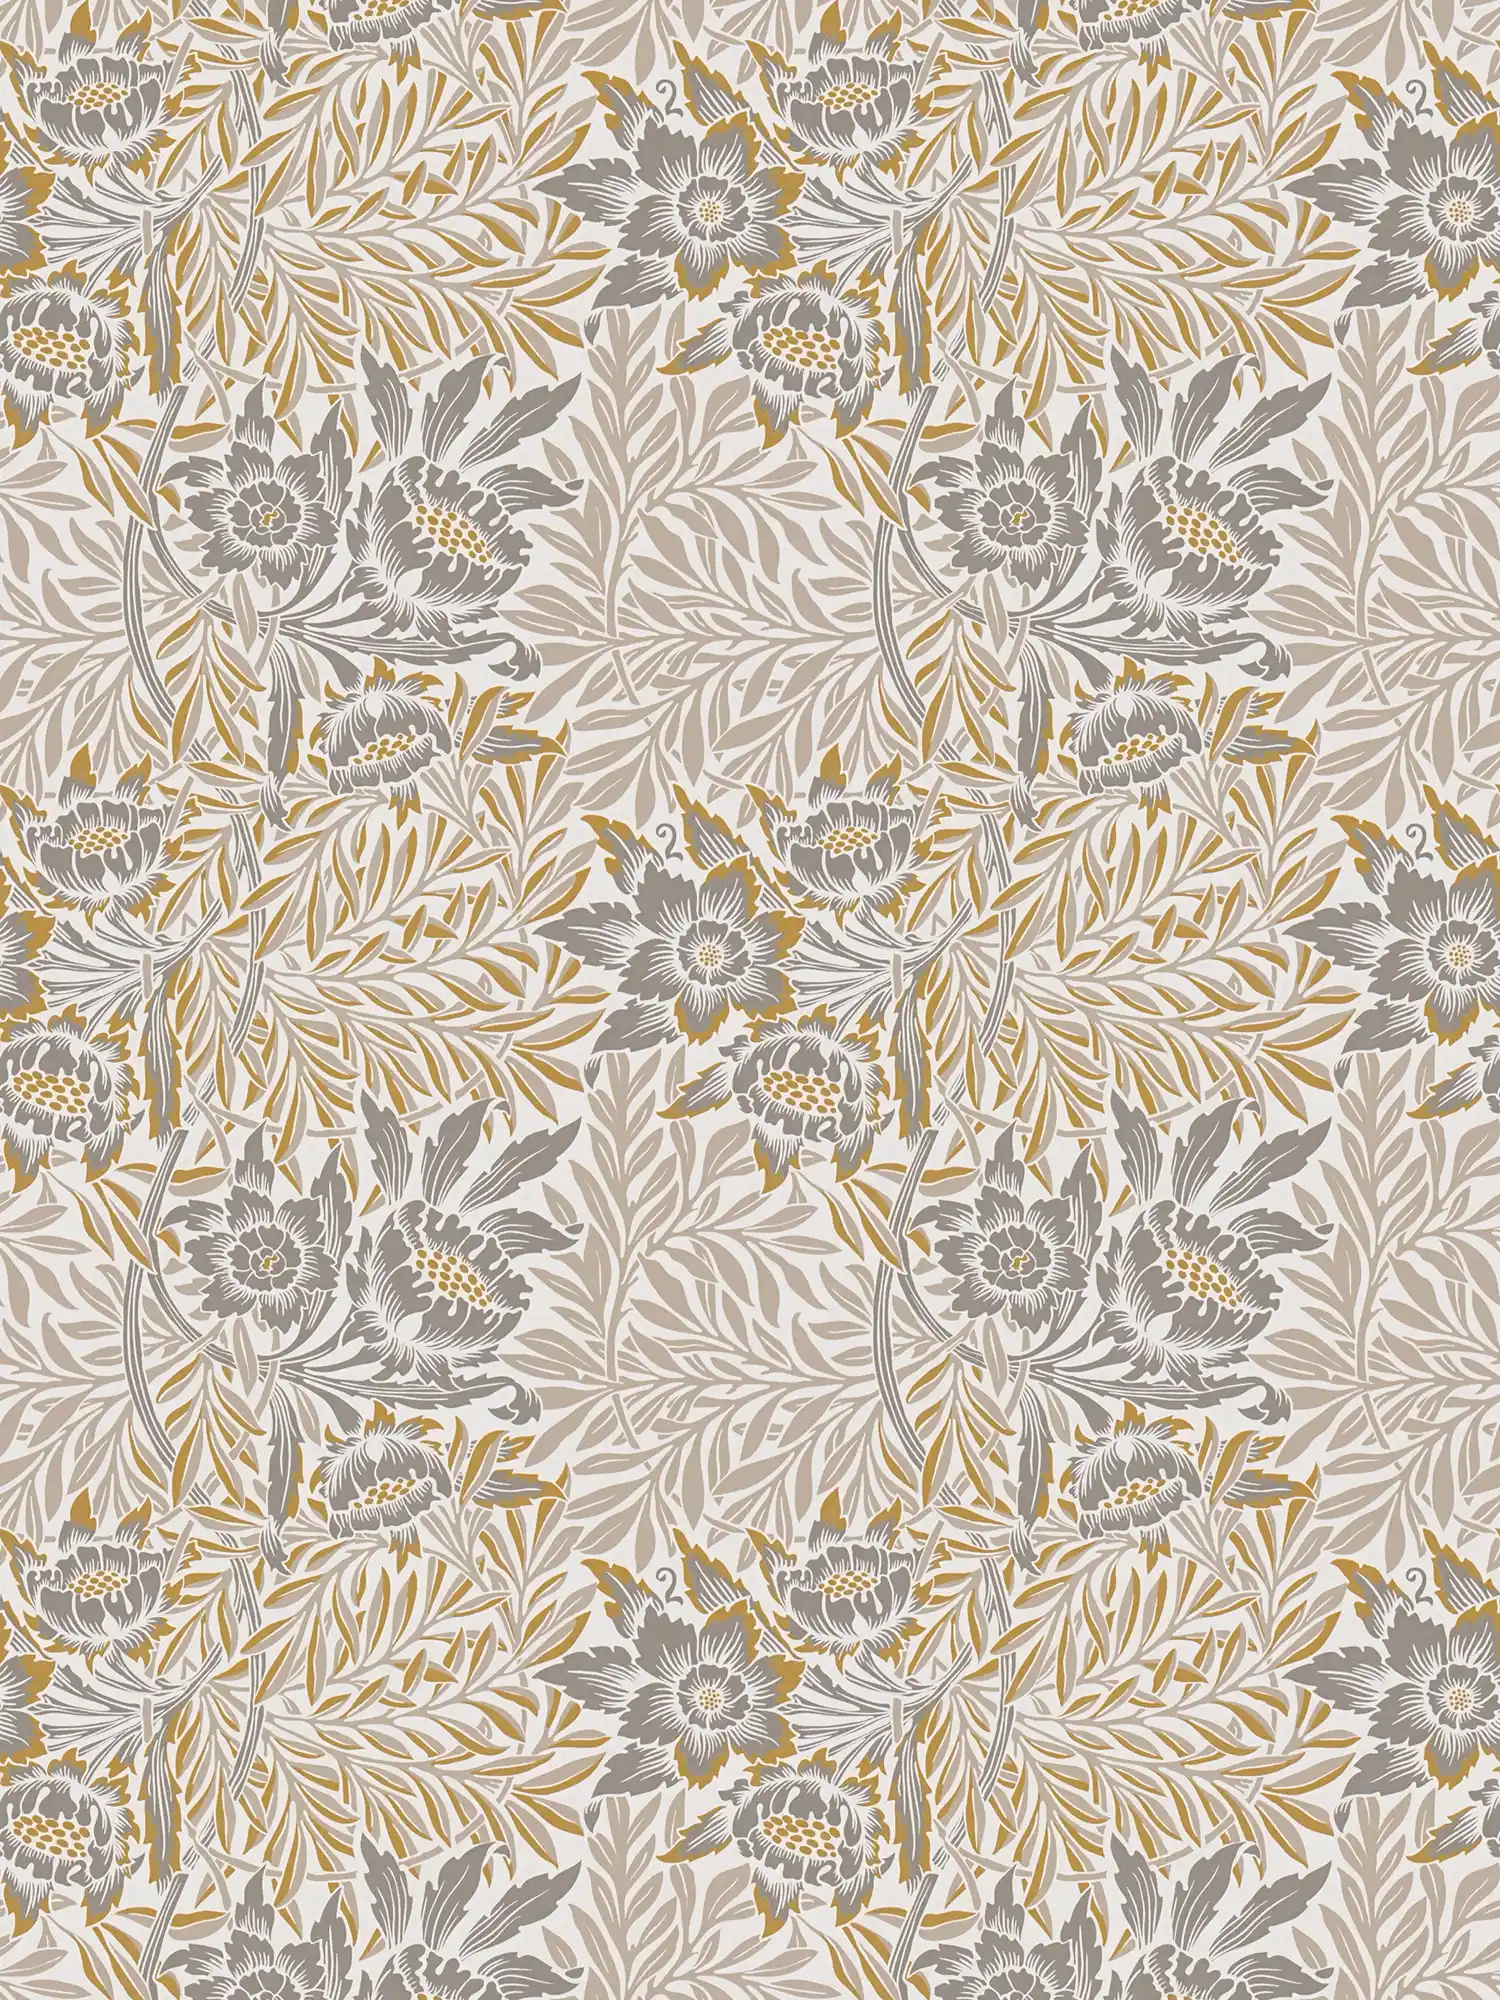 Non-woven wallpaper with various flowers and leaf tendrils - gold, beige, silver
